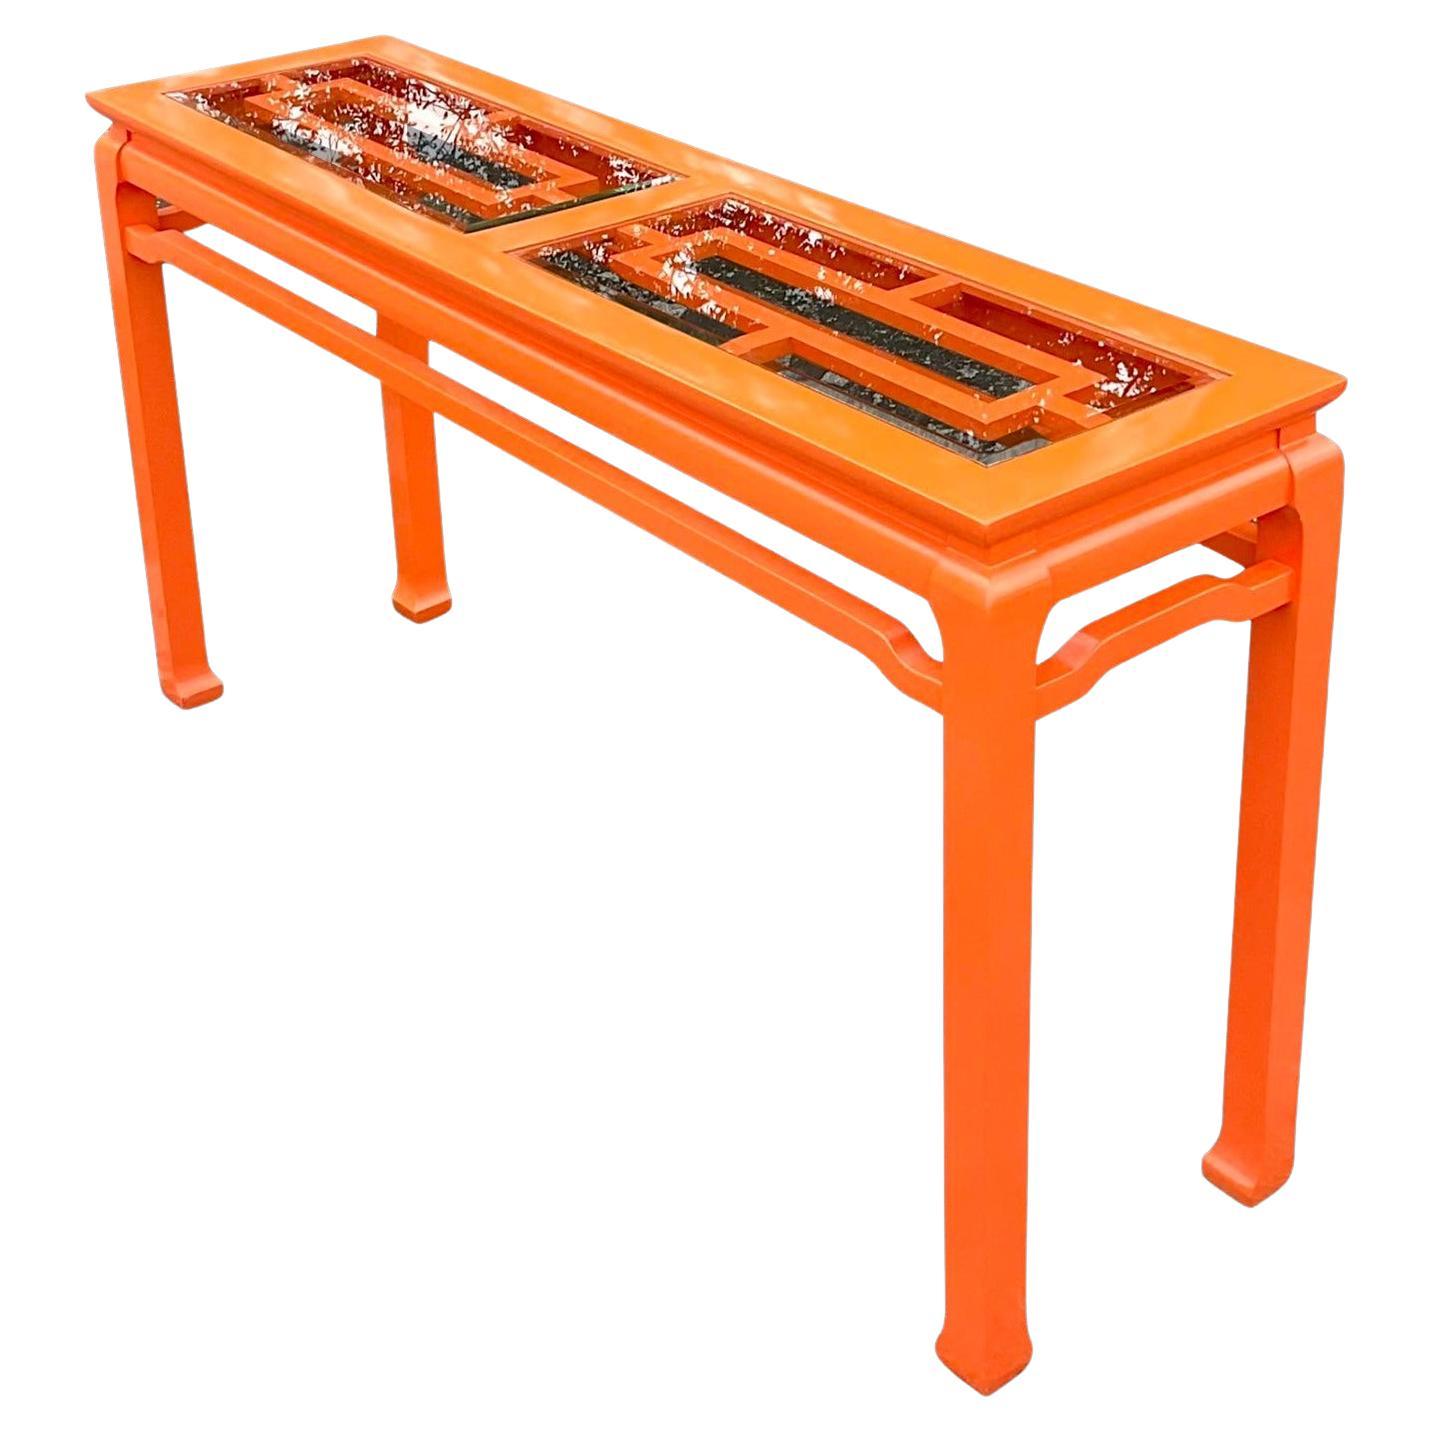 Late 20th Century Vintage Regency Orange Lacquered Fretwork Console Table For Sale